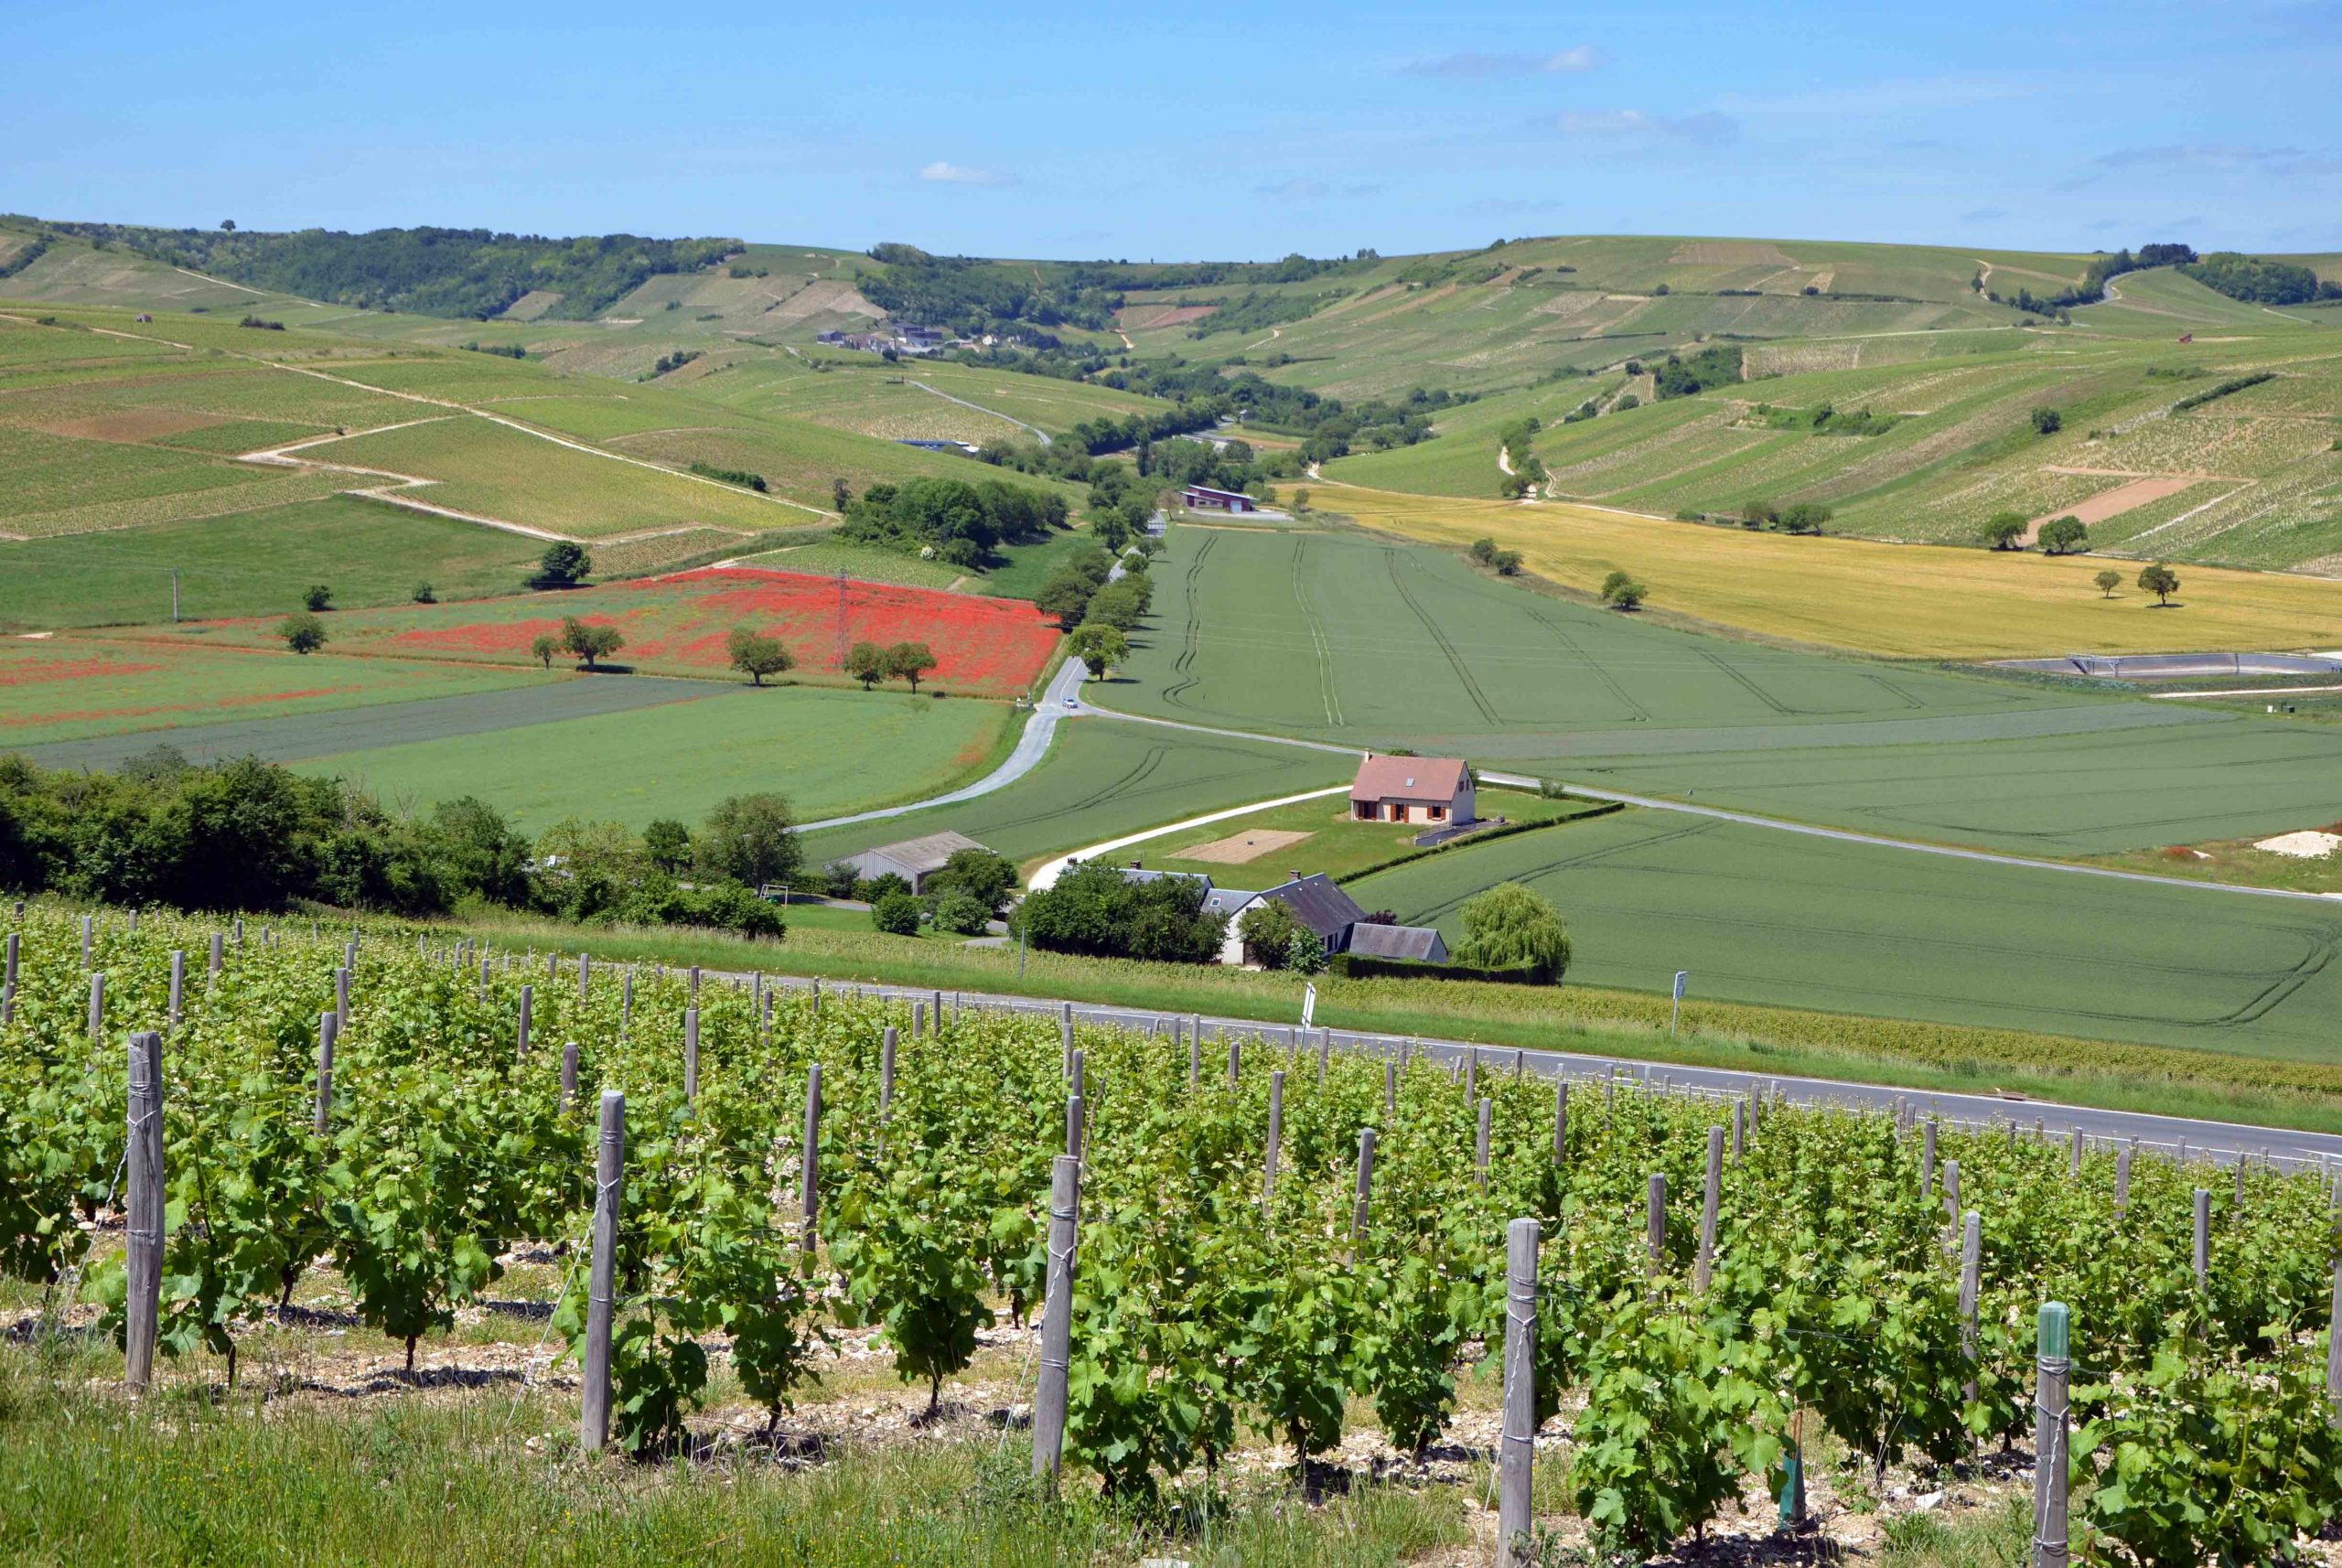 Sancerre © Pline - licence [CC BY-SA 3.0] from Wikimedia Commons